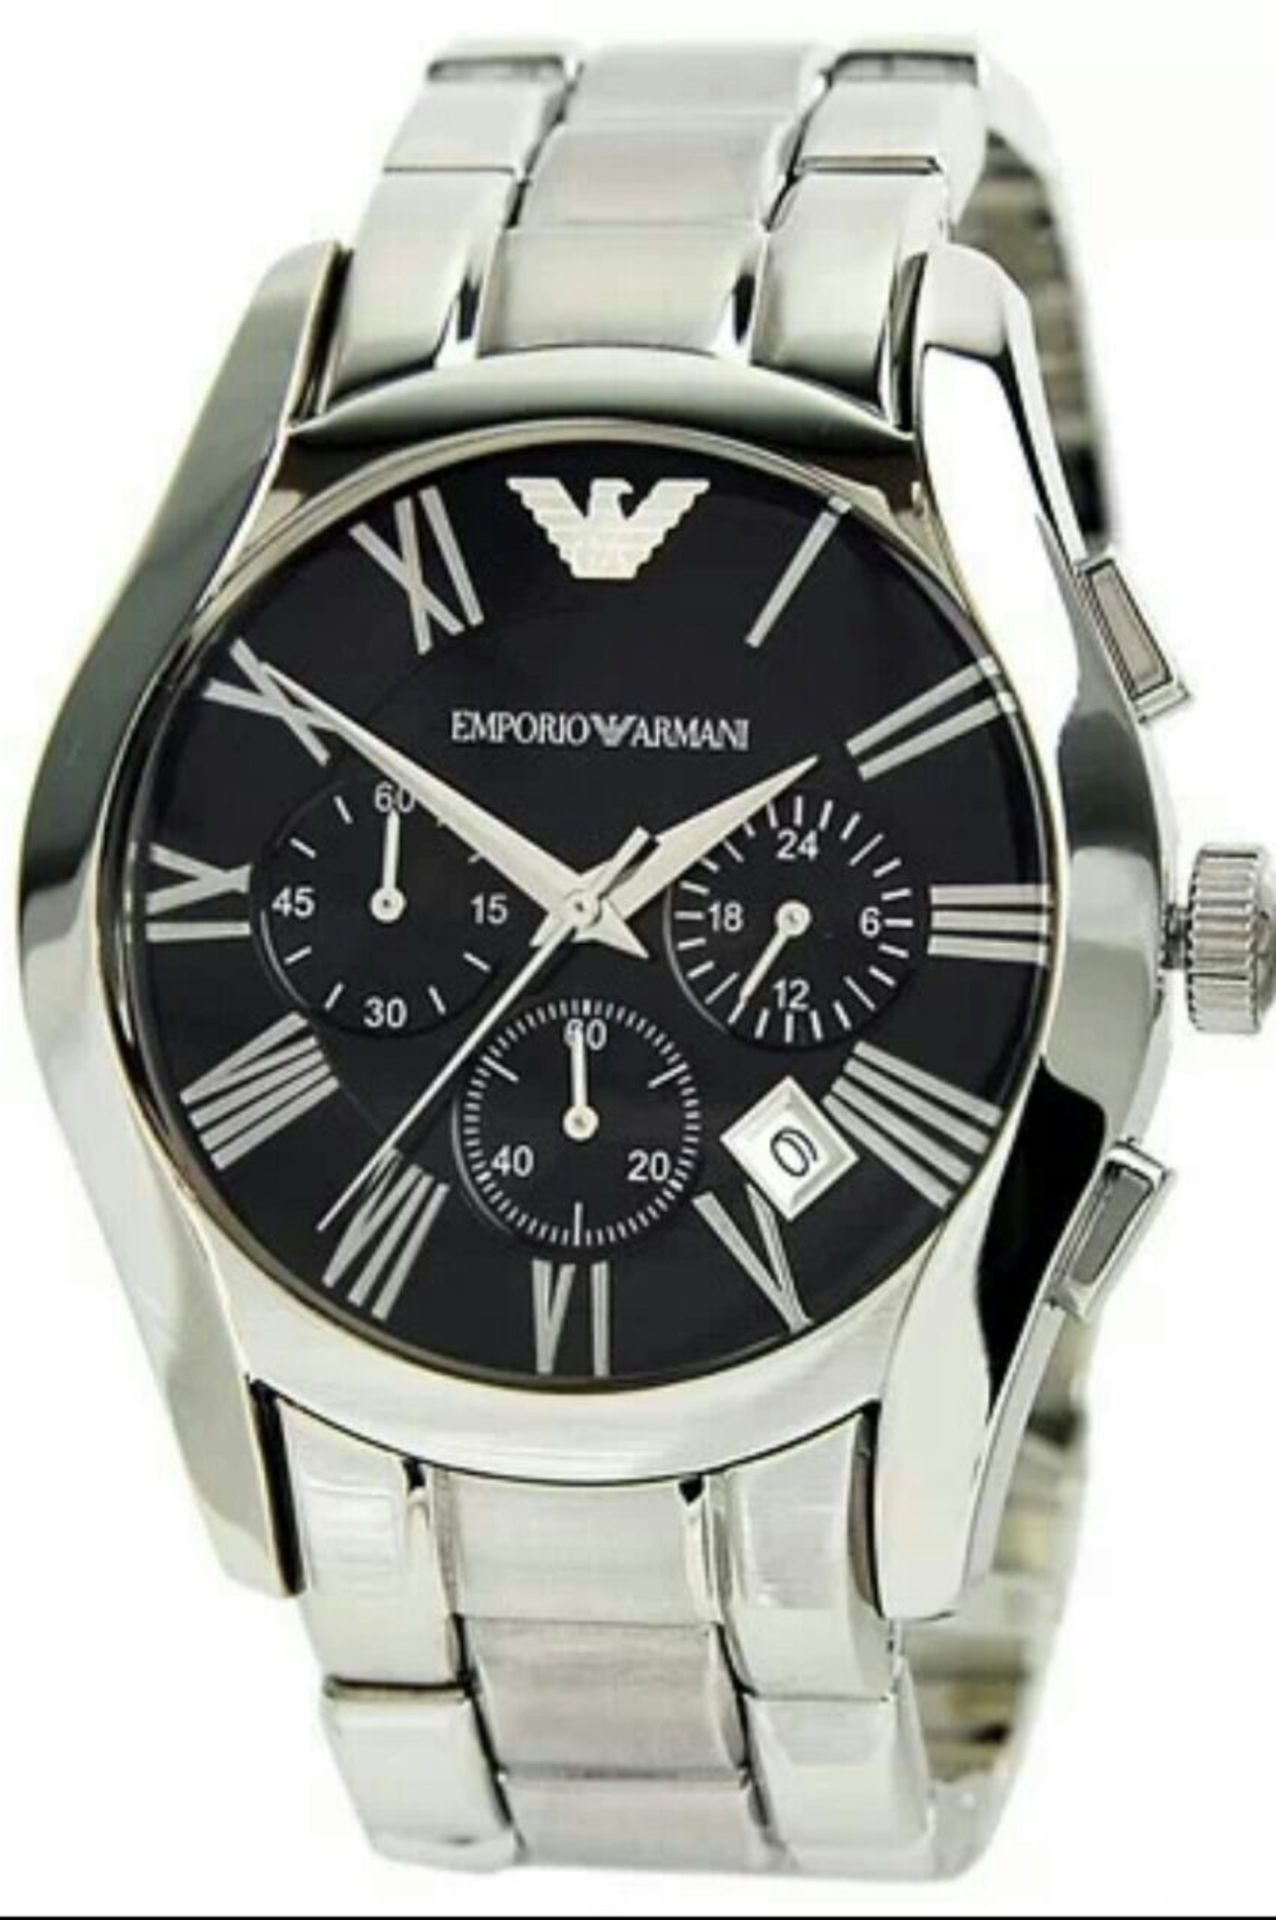 BRAND NEW EMPORIO ARMANI AR0673, GENTS POLISHED STAINLESS STEEL BRACELET WATCH, WITH A BLACK